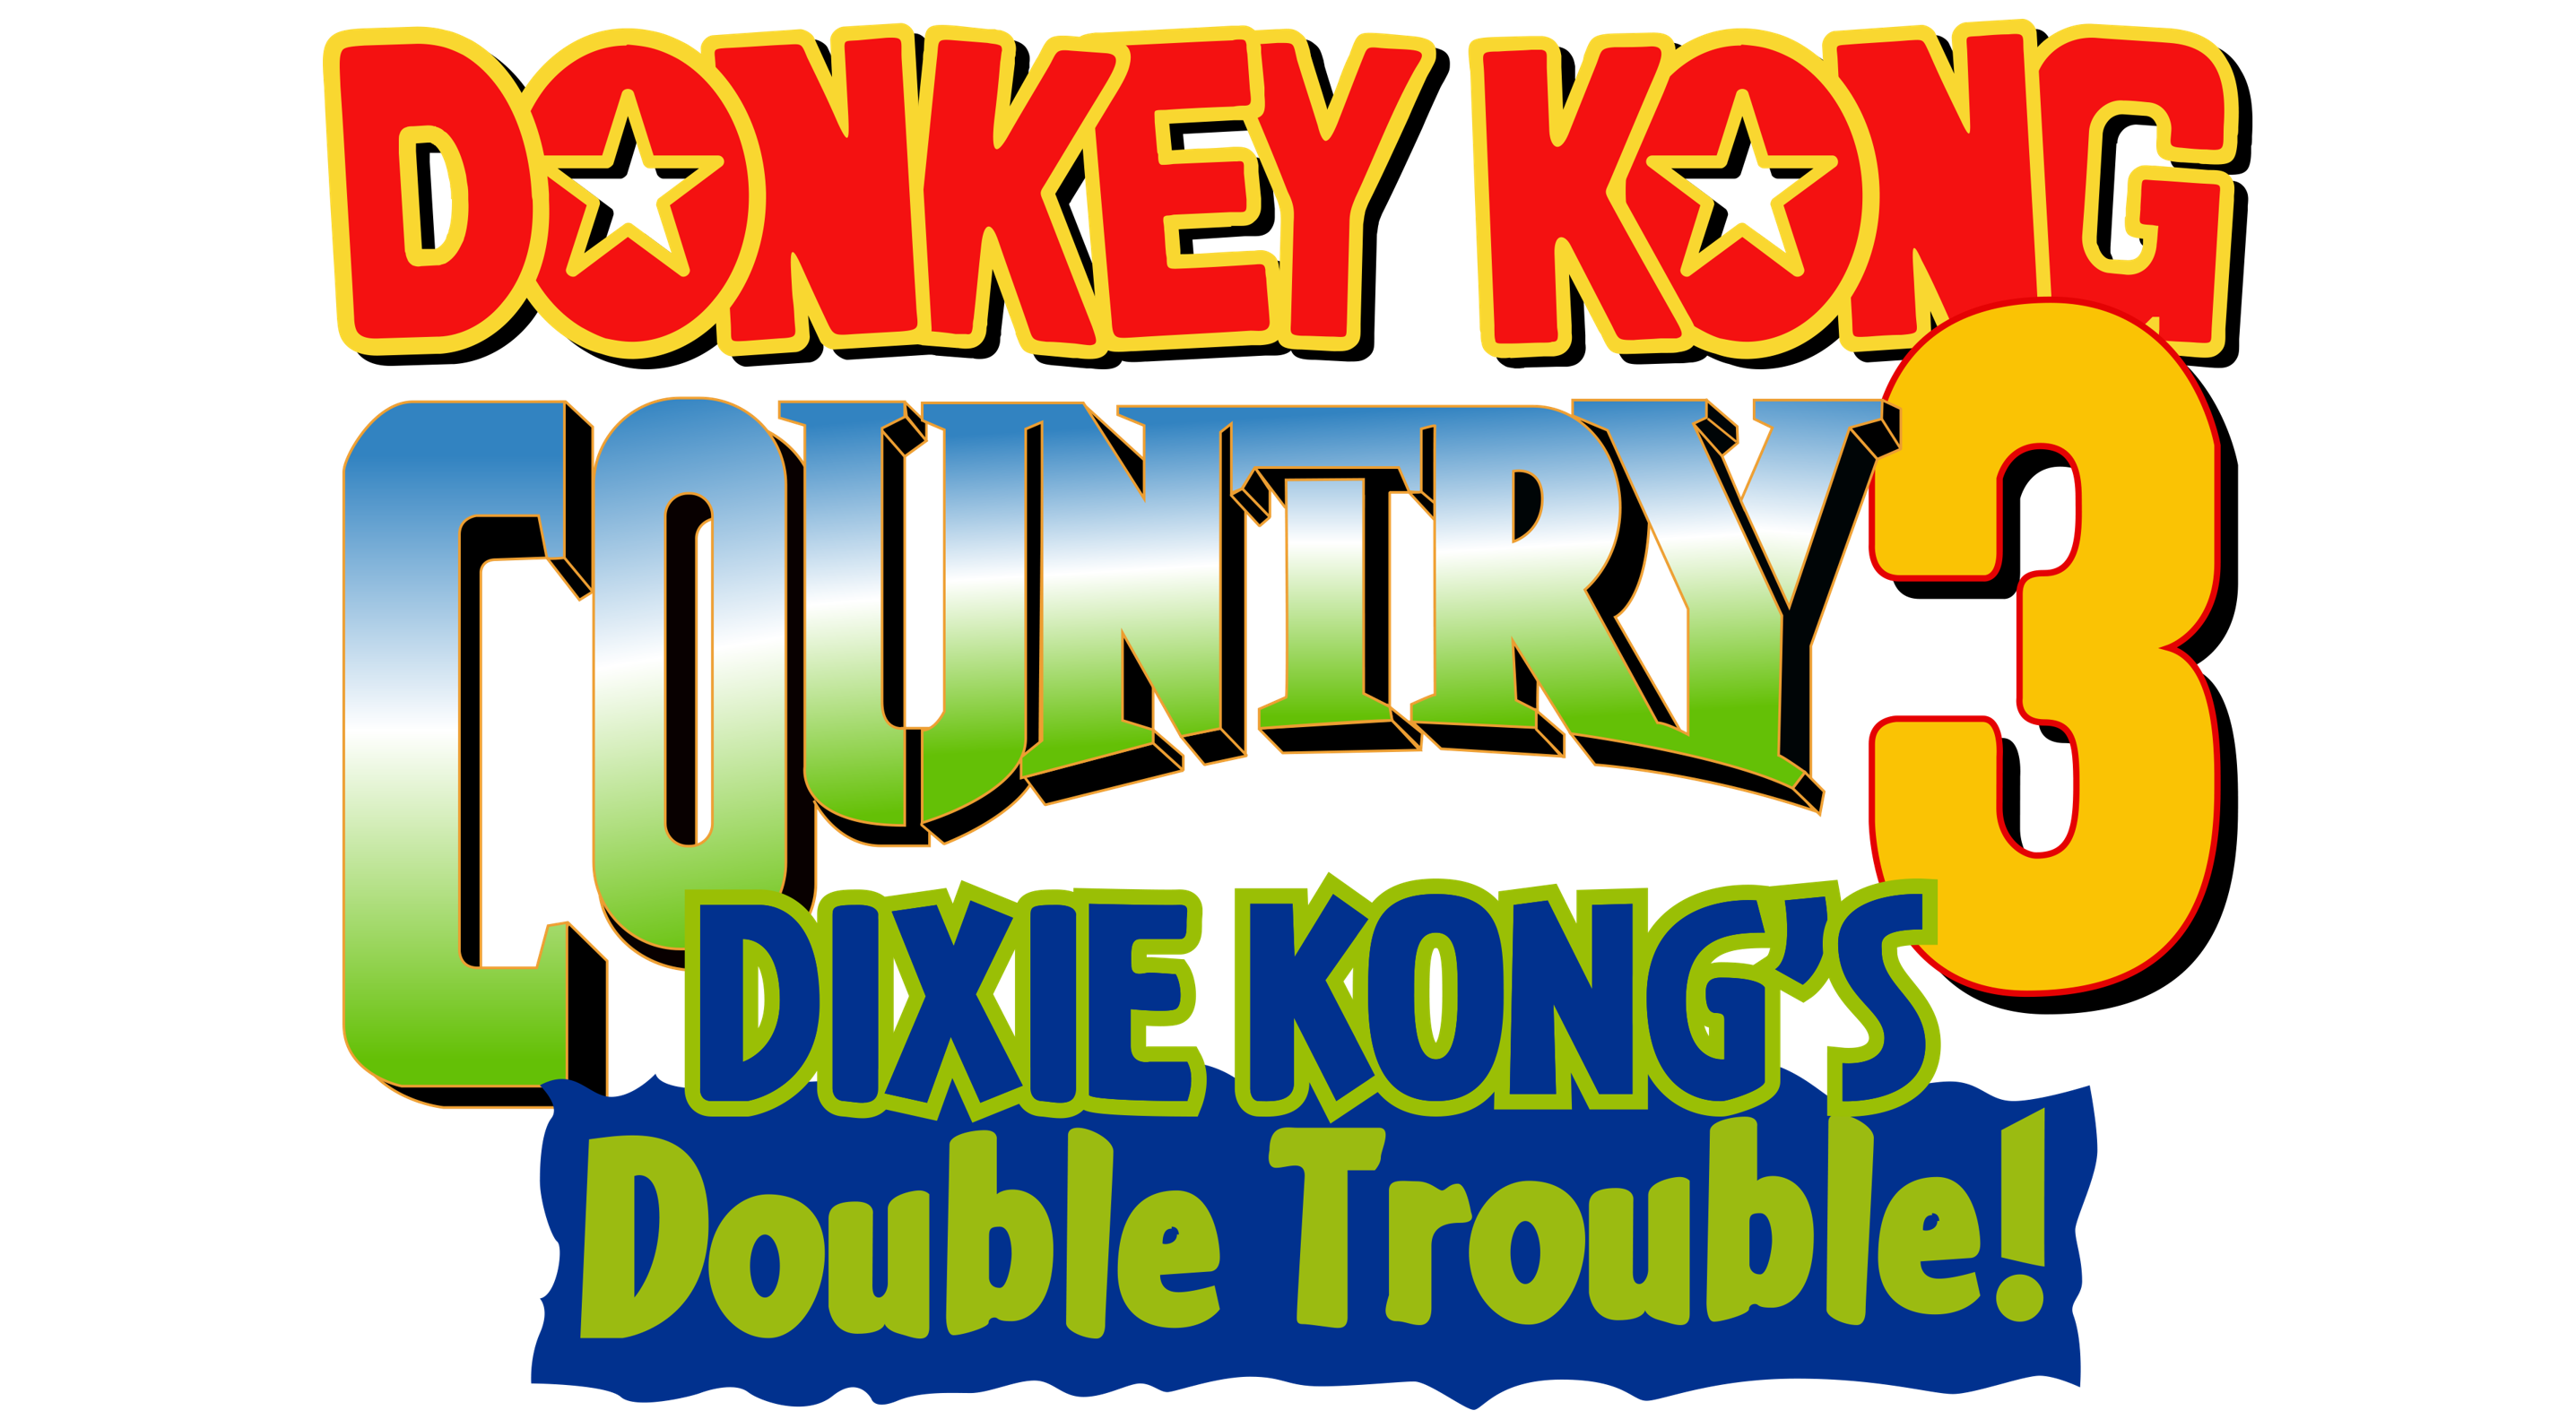 Donkey Kong Country 3: Dixie Kong's Double Trouble! logo